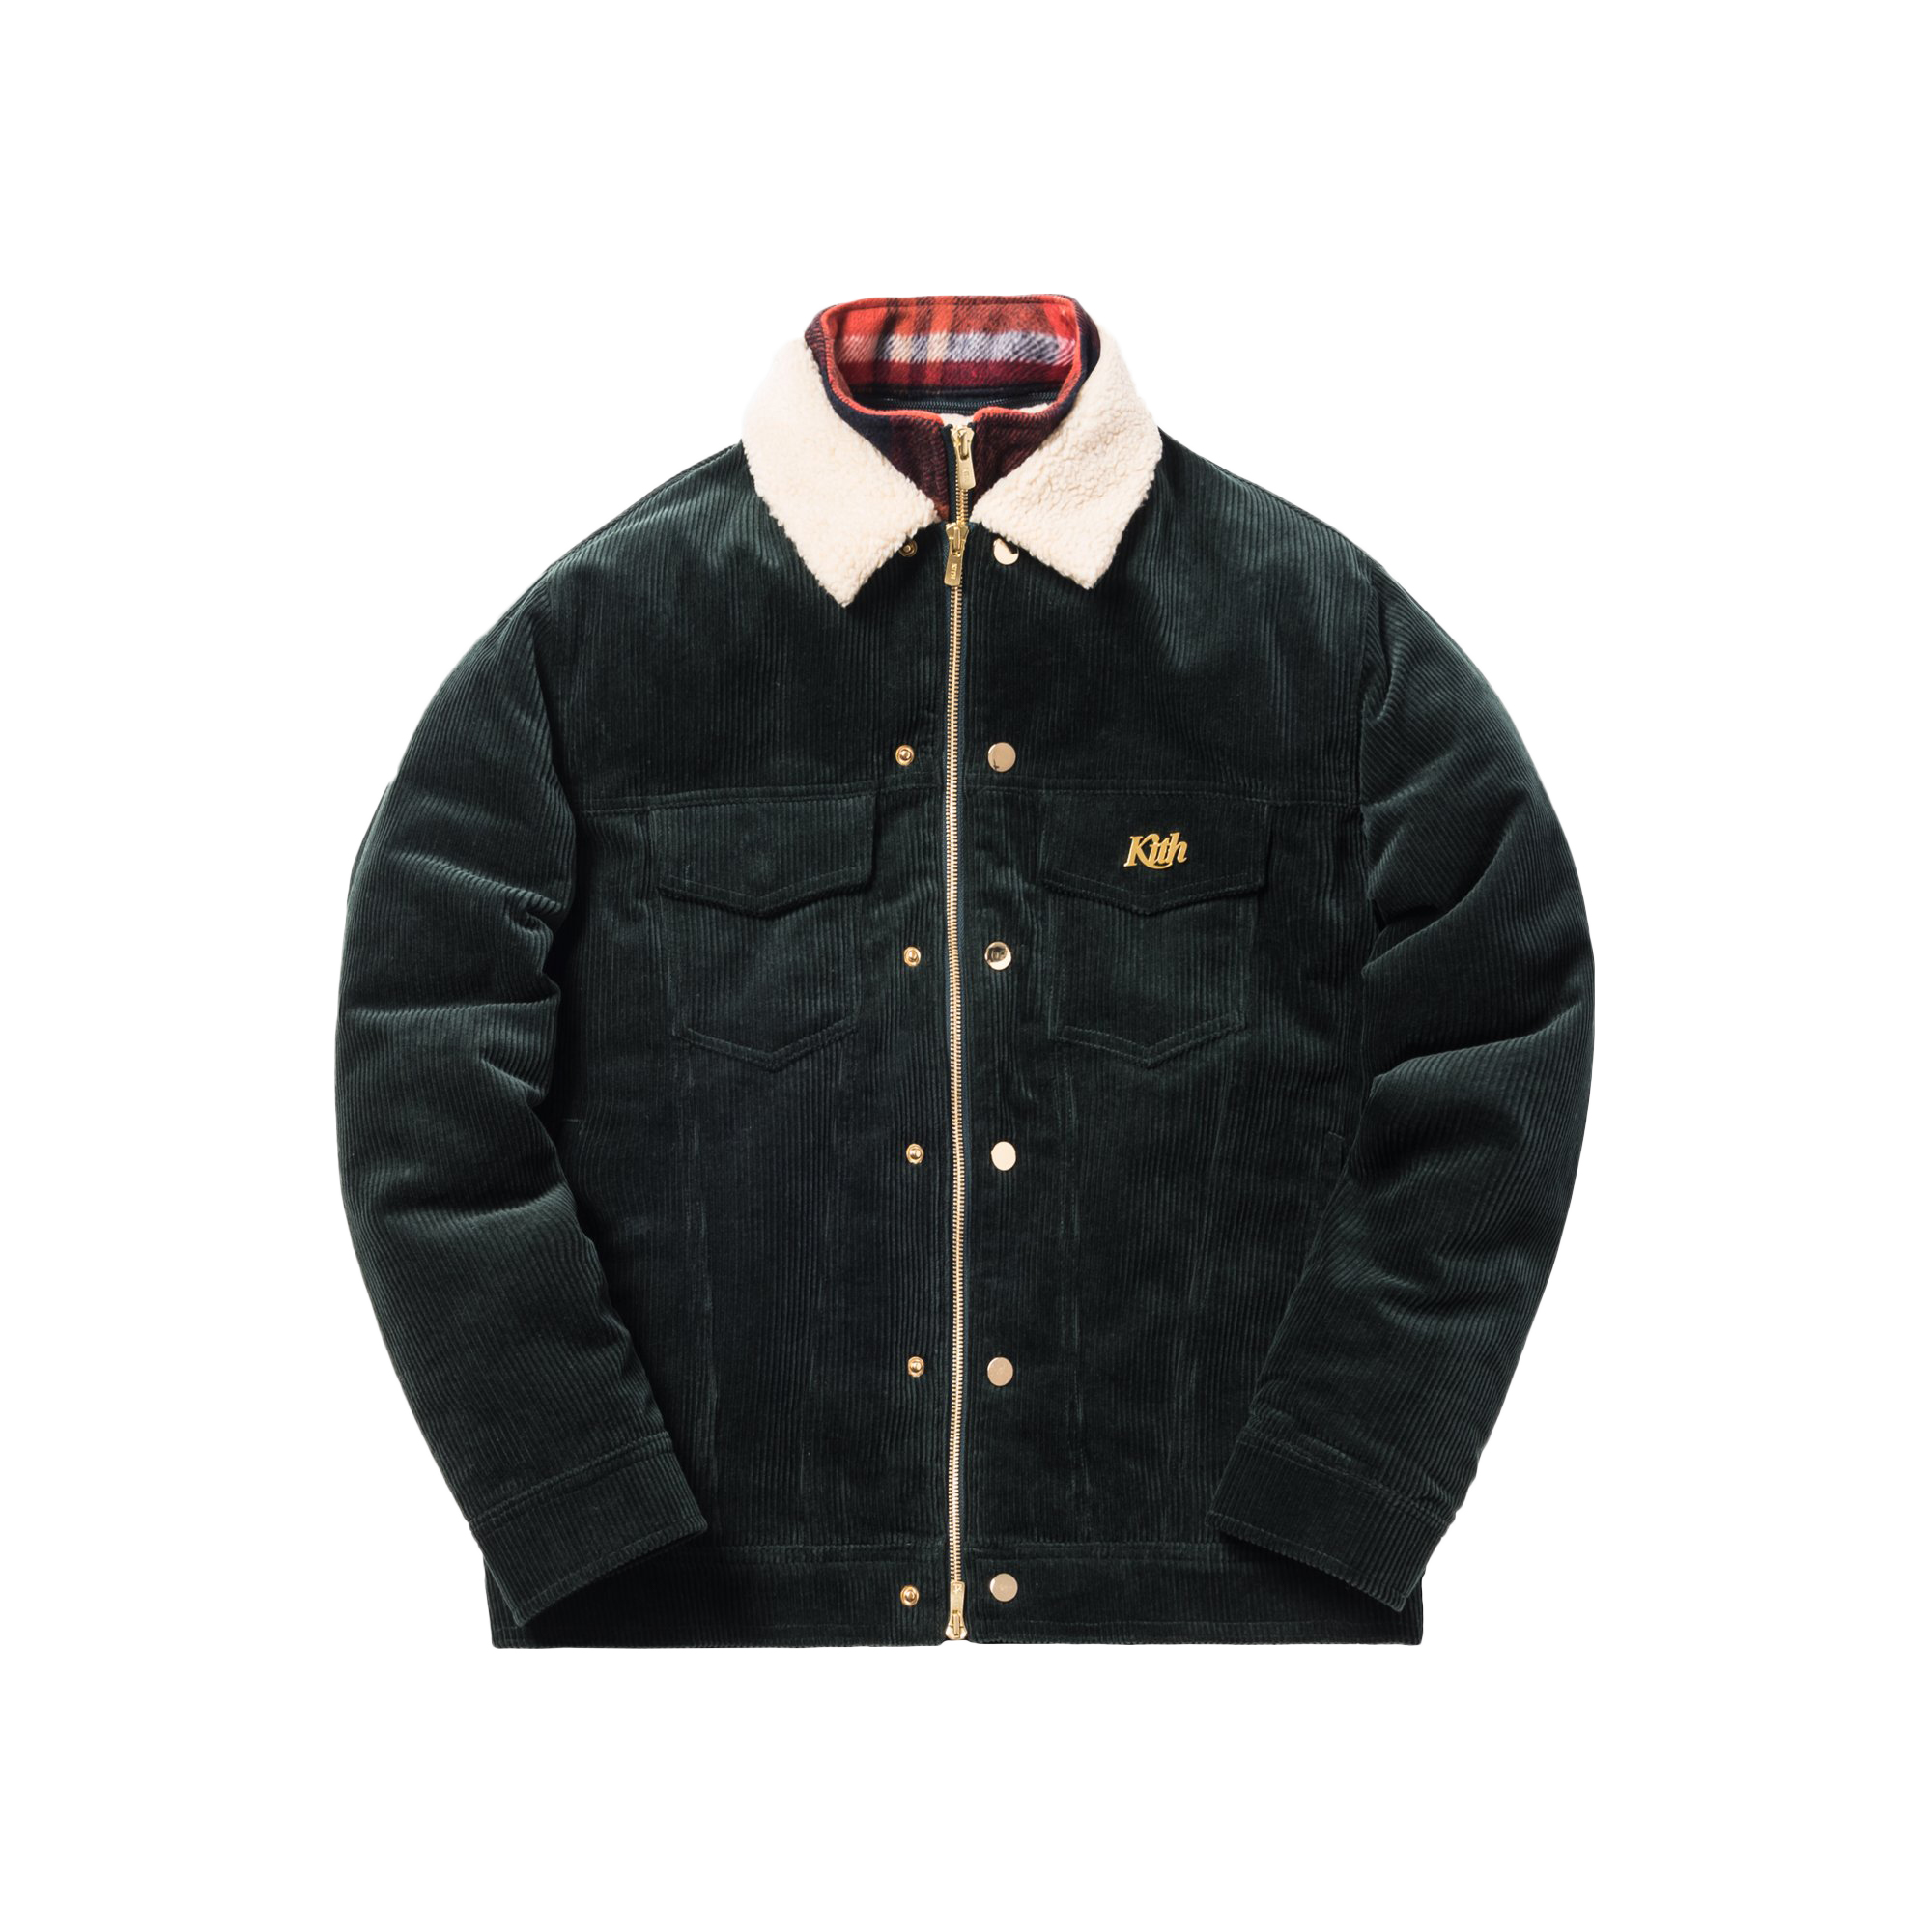 Kith Corduroy Laight Jacket Forest Green Men's - FW18 - US